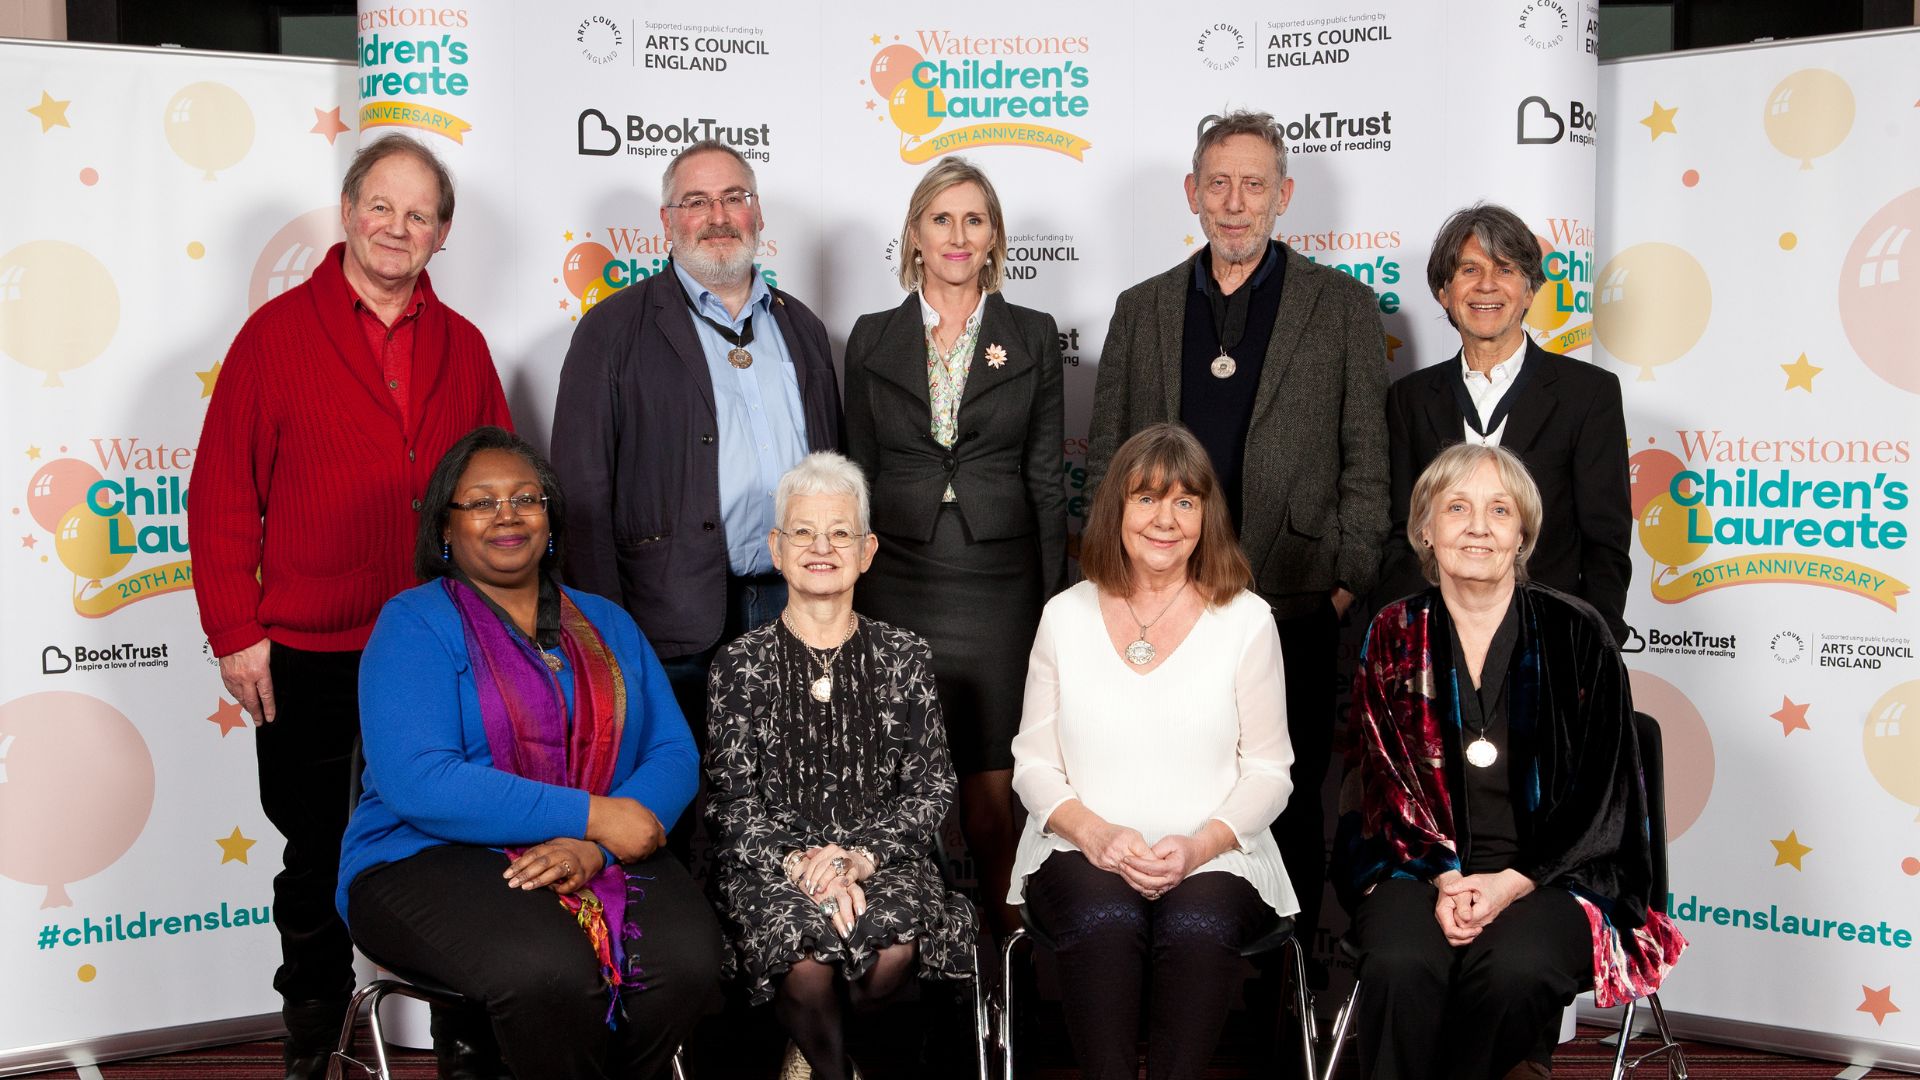 Group photo of former children's laureates.